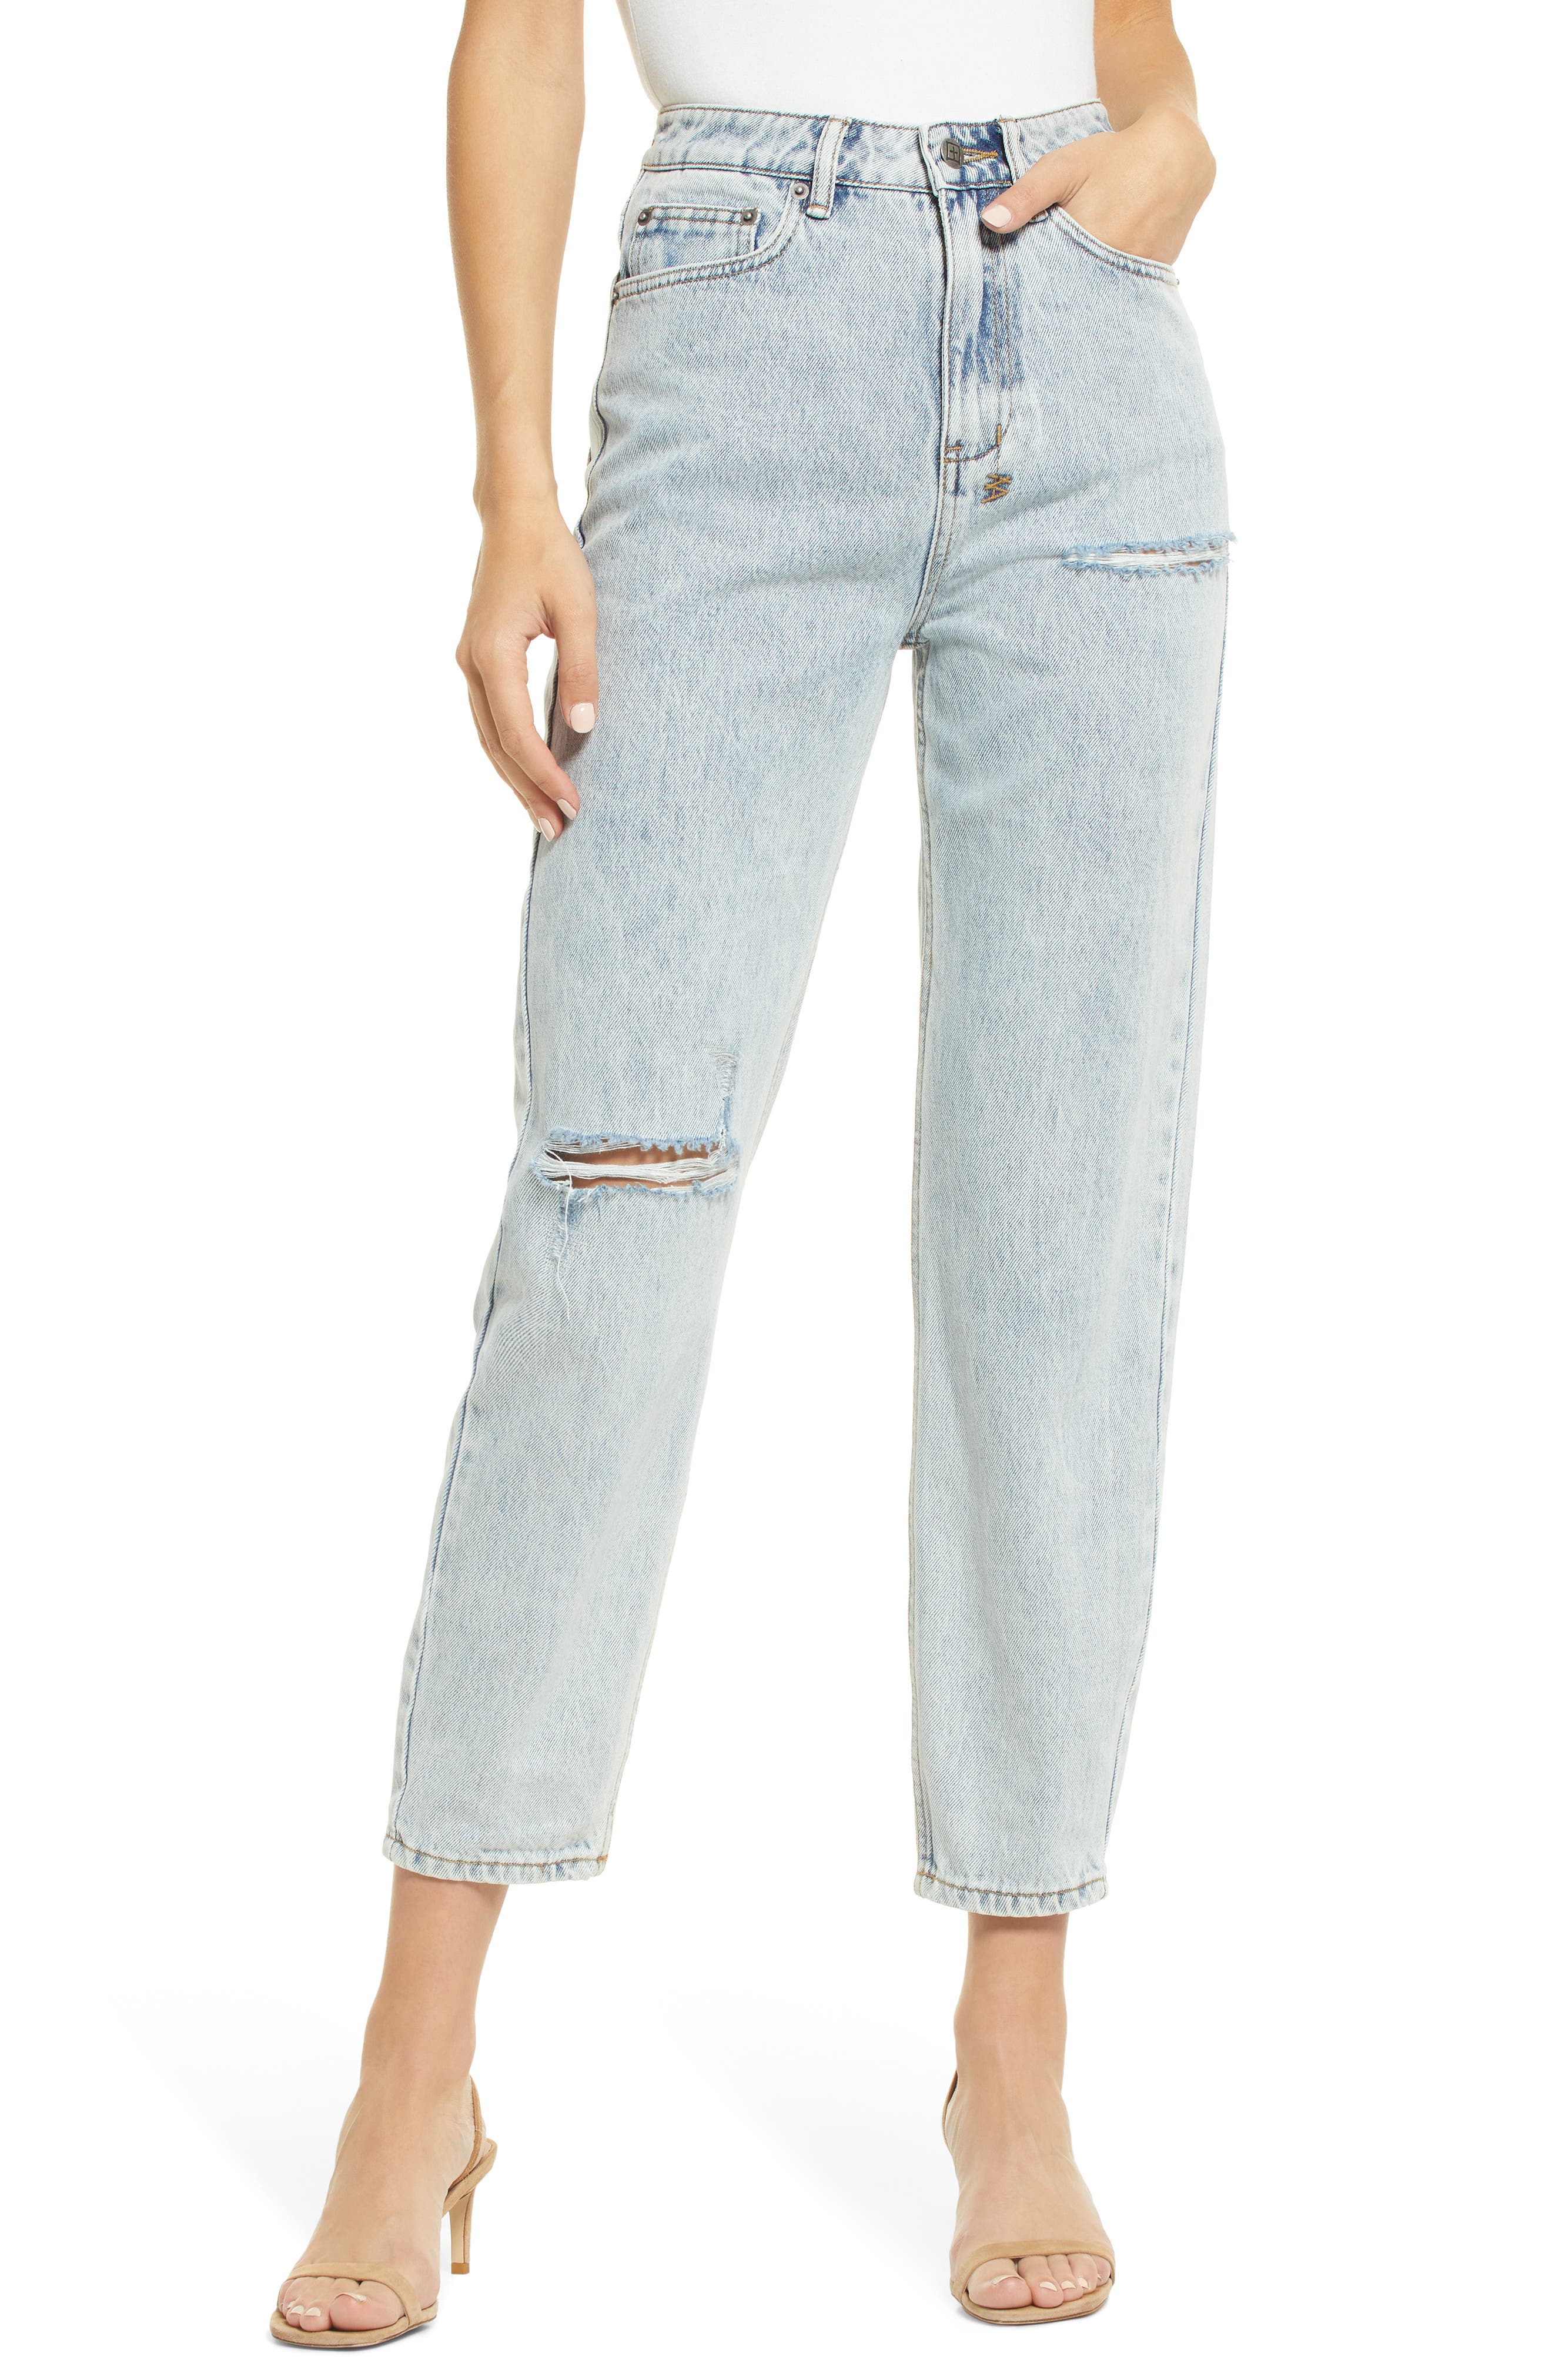 Ksubi Pointed Muse Ripped Straight Leg Jeans in Denim at Nordstrom, Size 31